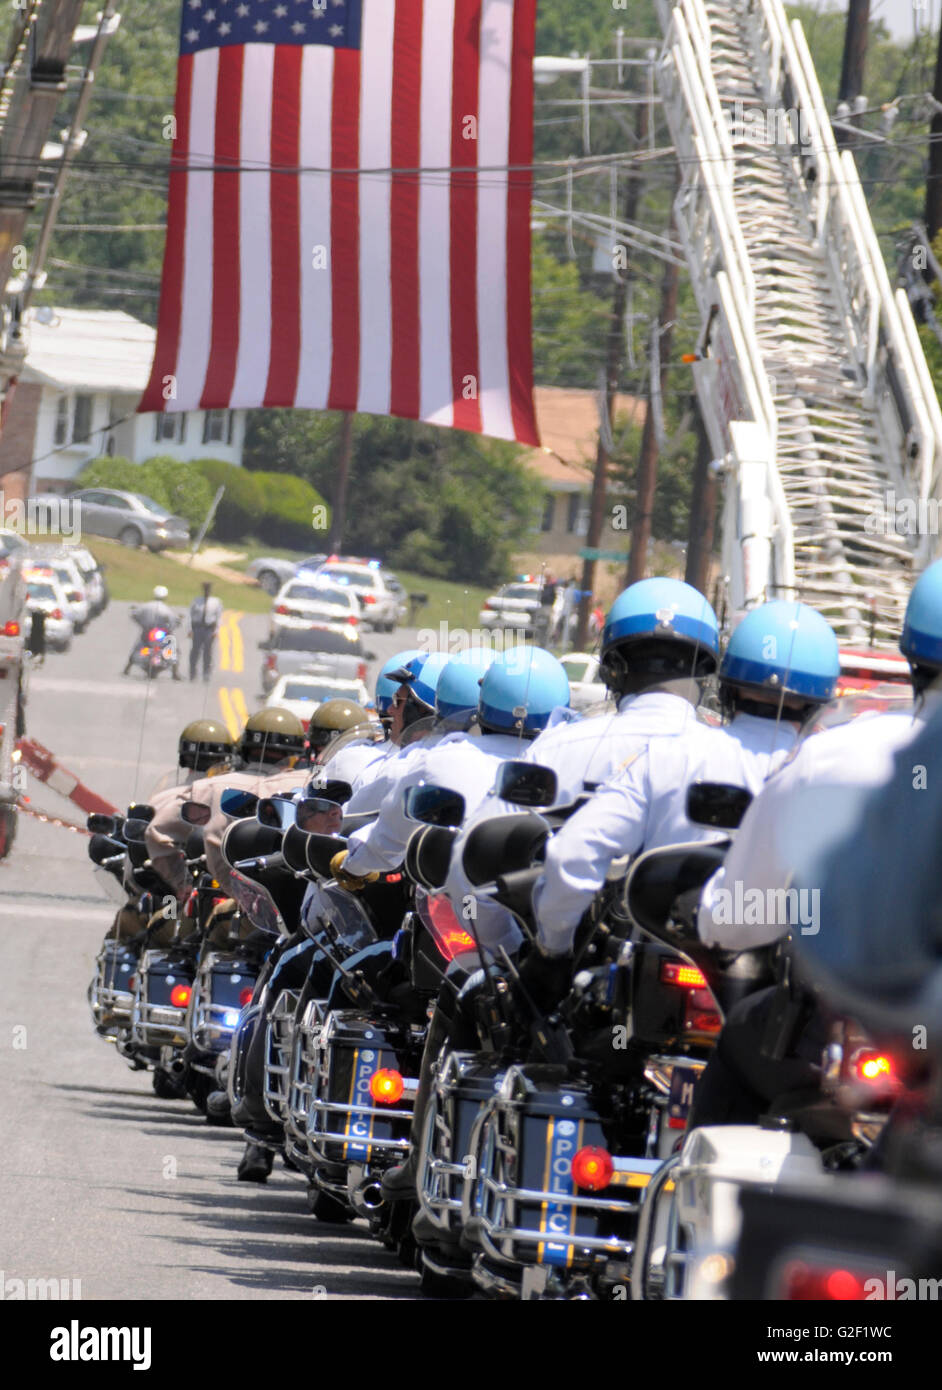 Scores of Motorcycle policemen in a police funeral in Beltsville, Maryland Stock Photo